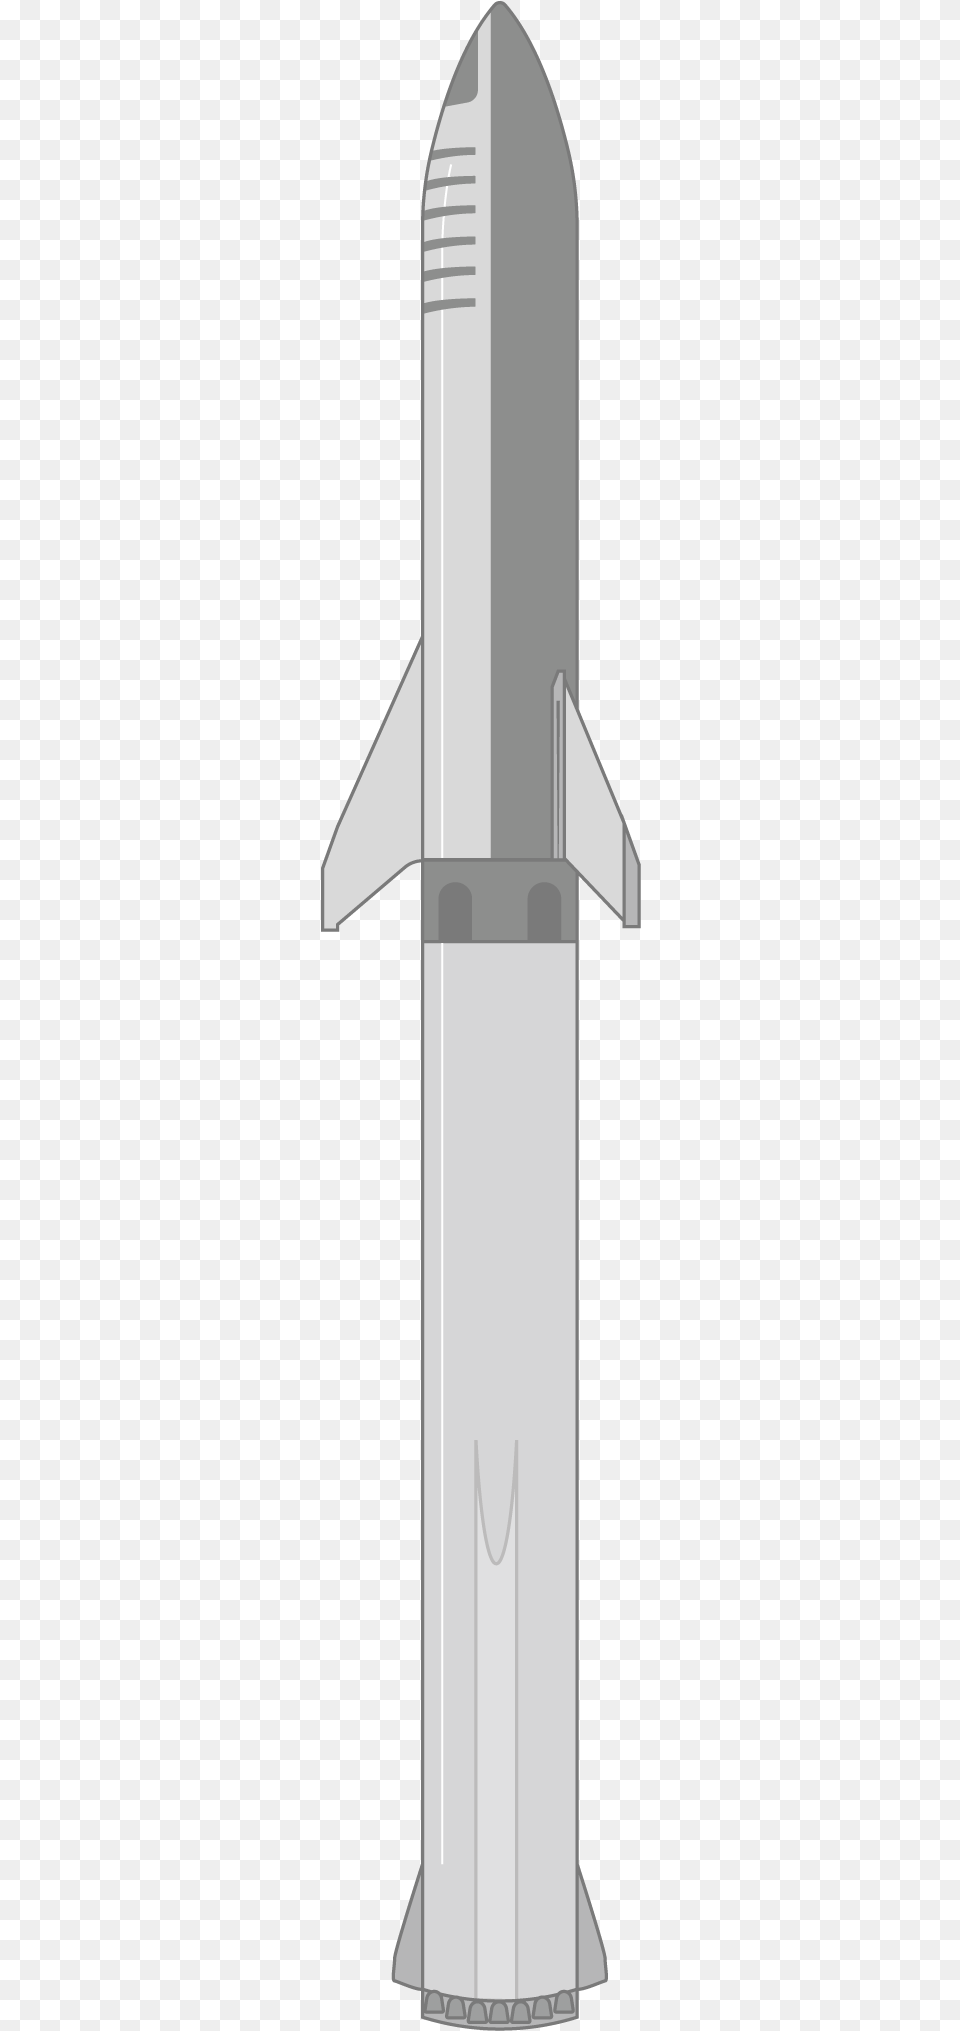 Starship And Super Heavy, Ammunition, Missile, Weapon, Blade Png